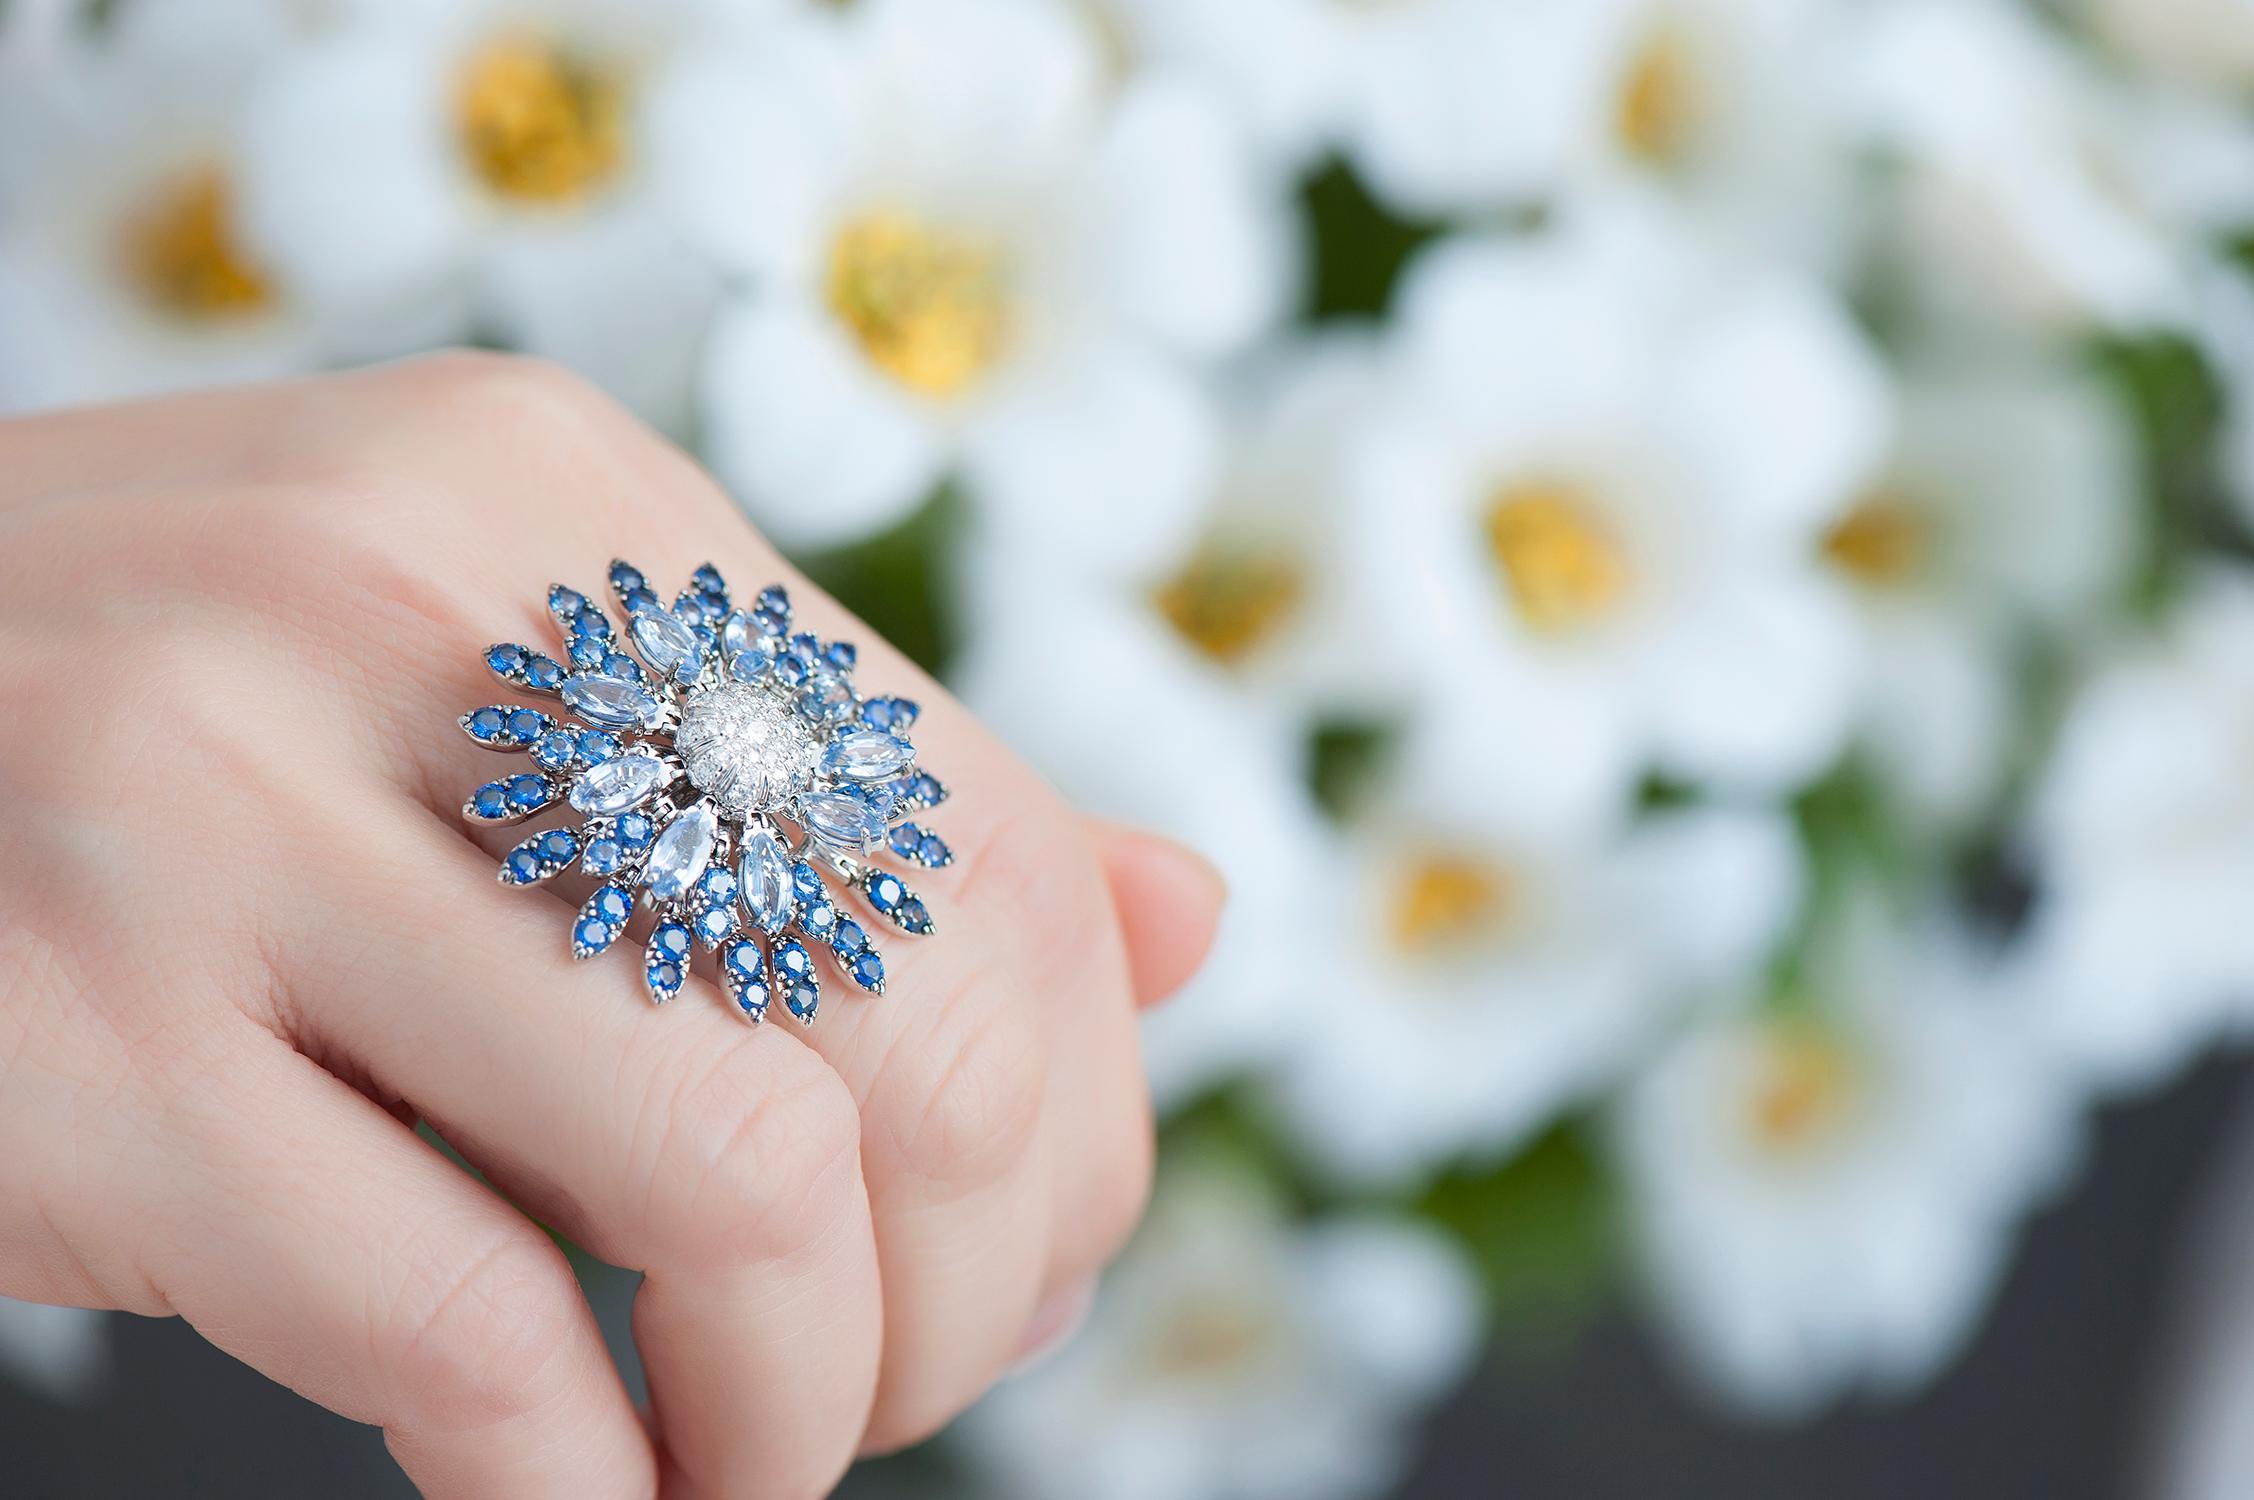 18K White Gold Sunflower Ring with Diamonds and Blue Sapphires.
Petals are kinetic with movement.
Gold Weight: 16.45 grams
Diamond Carats: 0.25
Sapphire Carats: 5.20
FerrariFirenze, Handmade in Italy.
US Ring Size: 6
Style: FF046RG42

18K White Gold